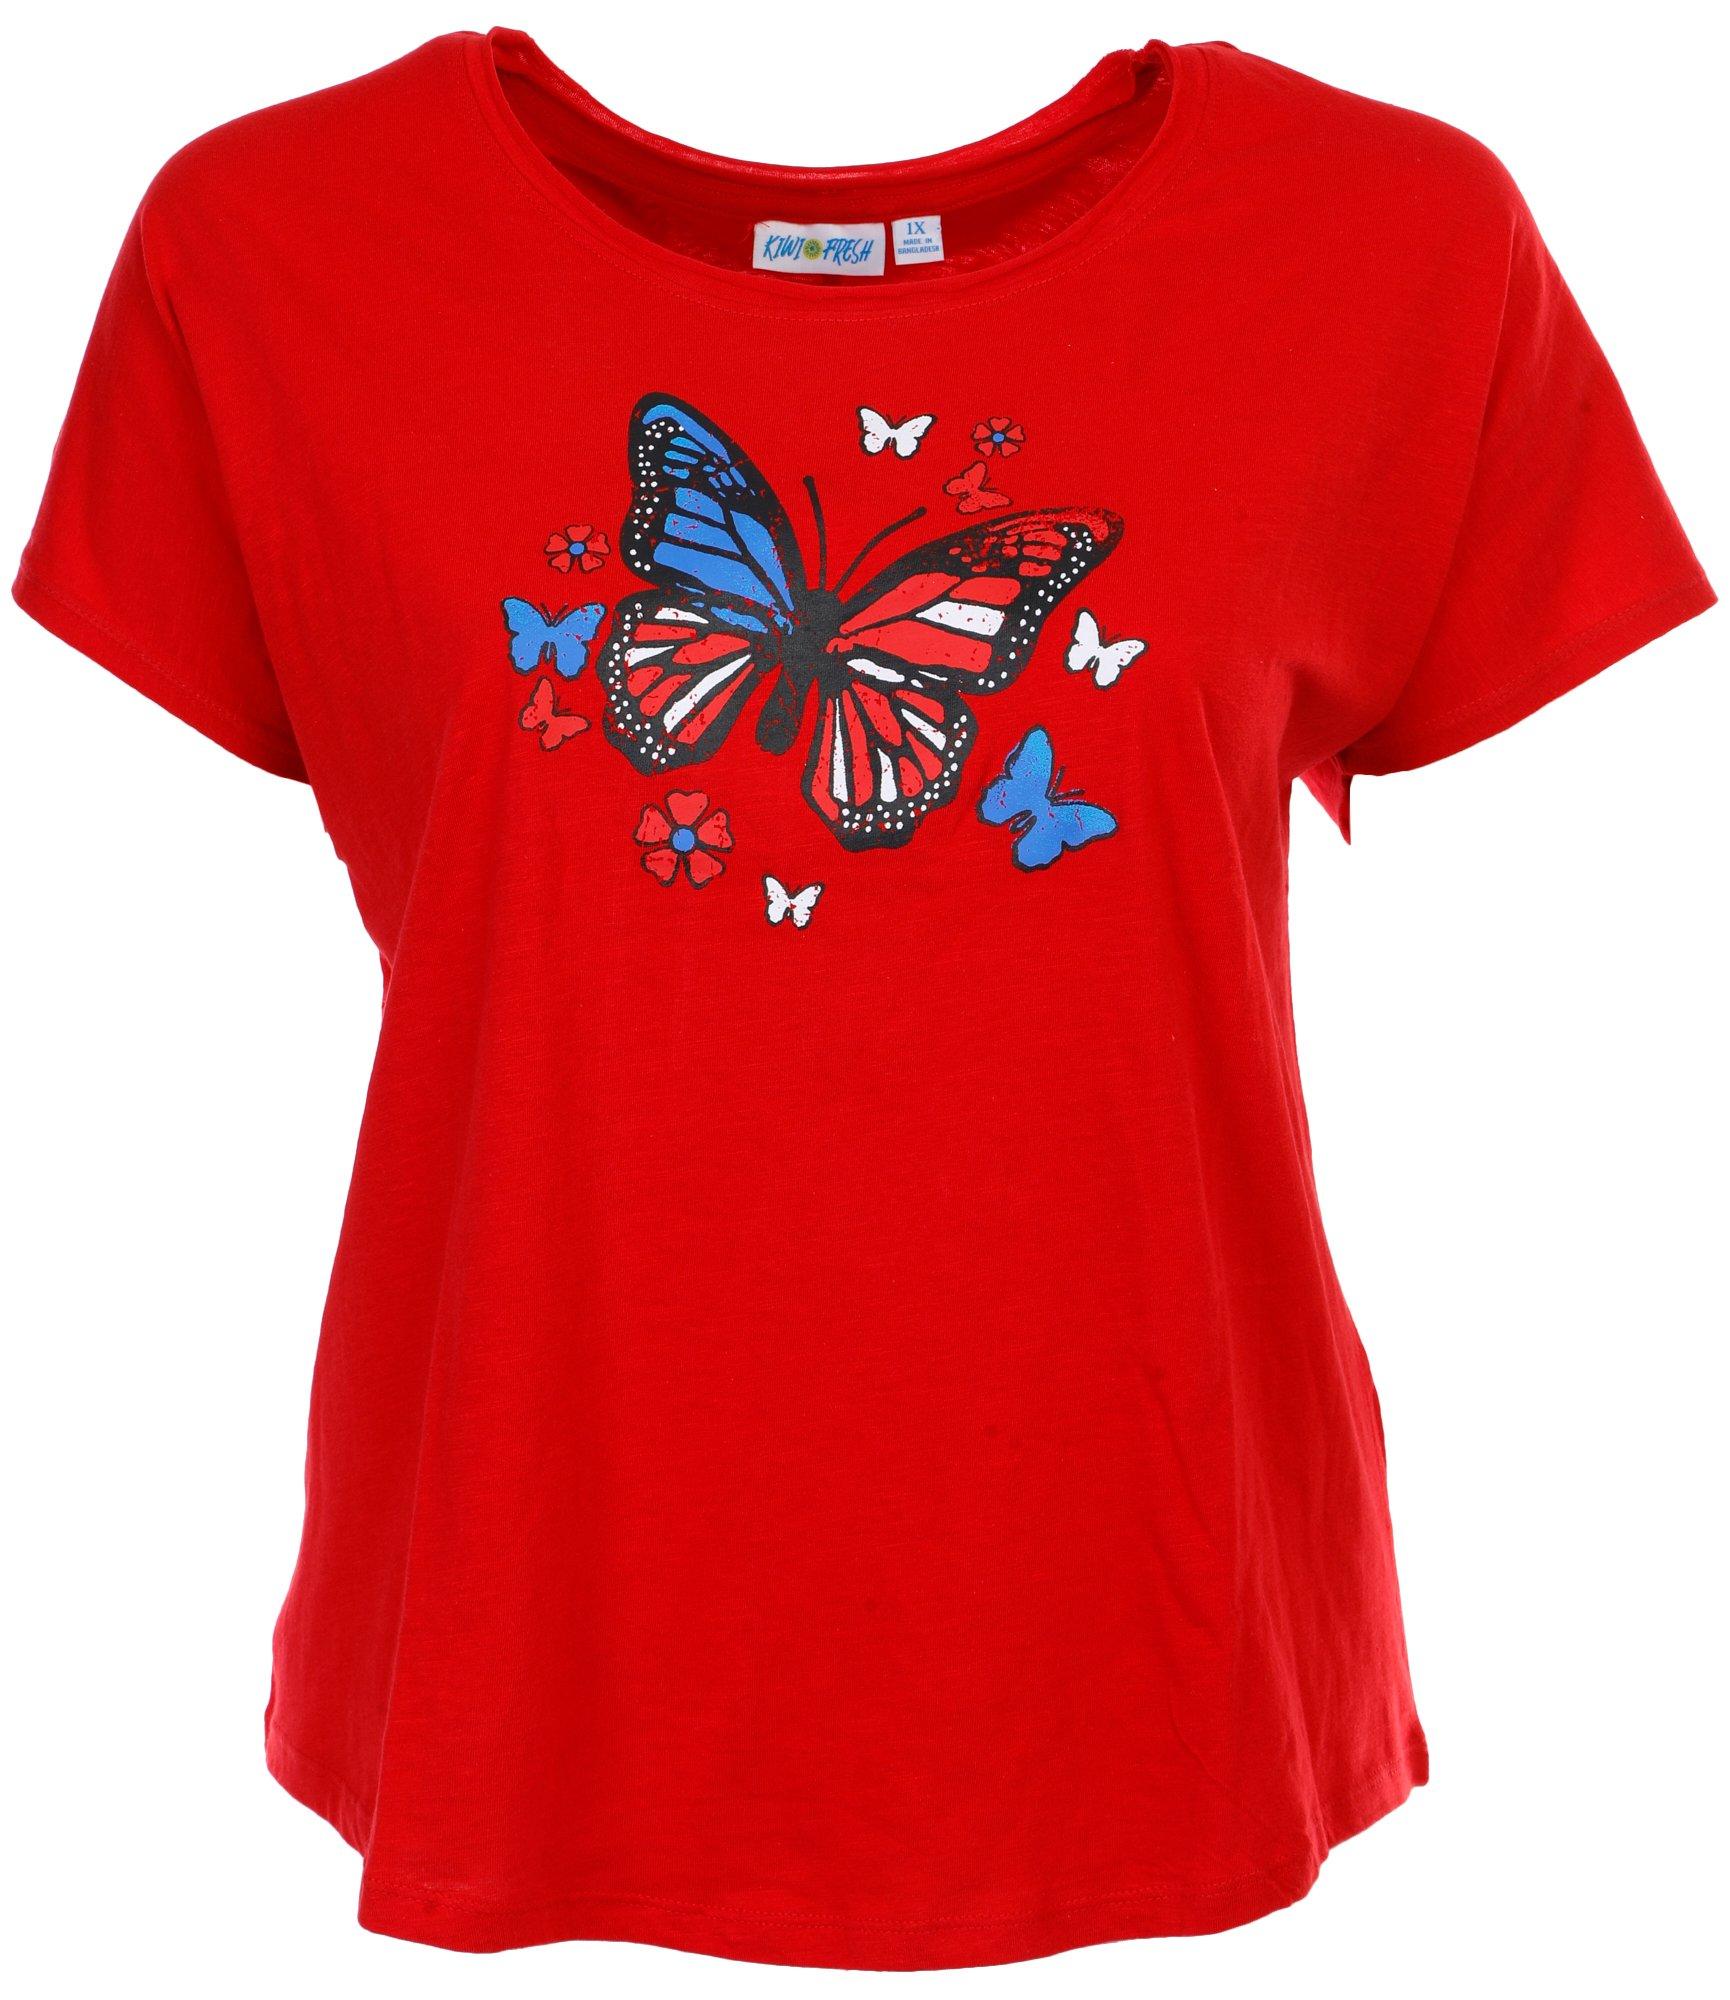 Women's Plus Americana Butterfly Graphic Top